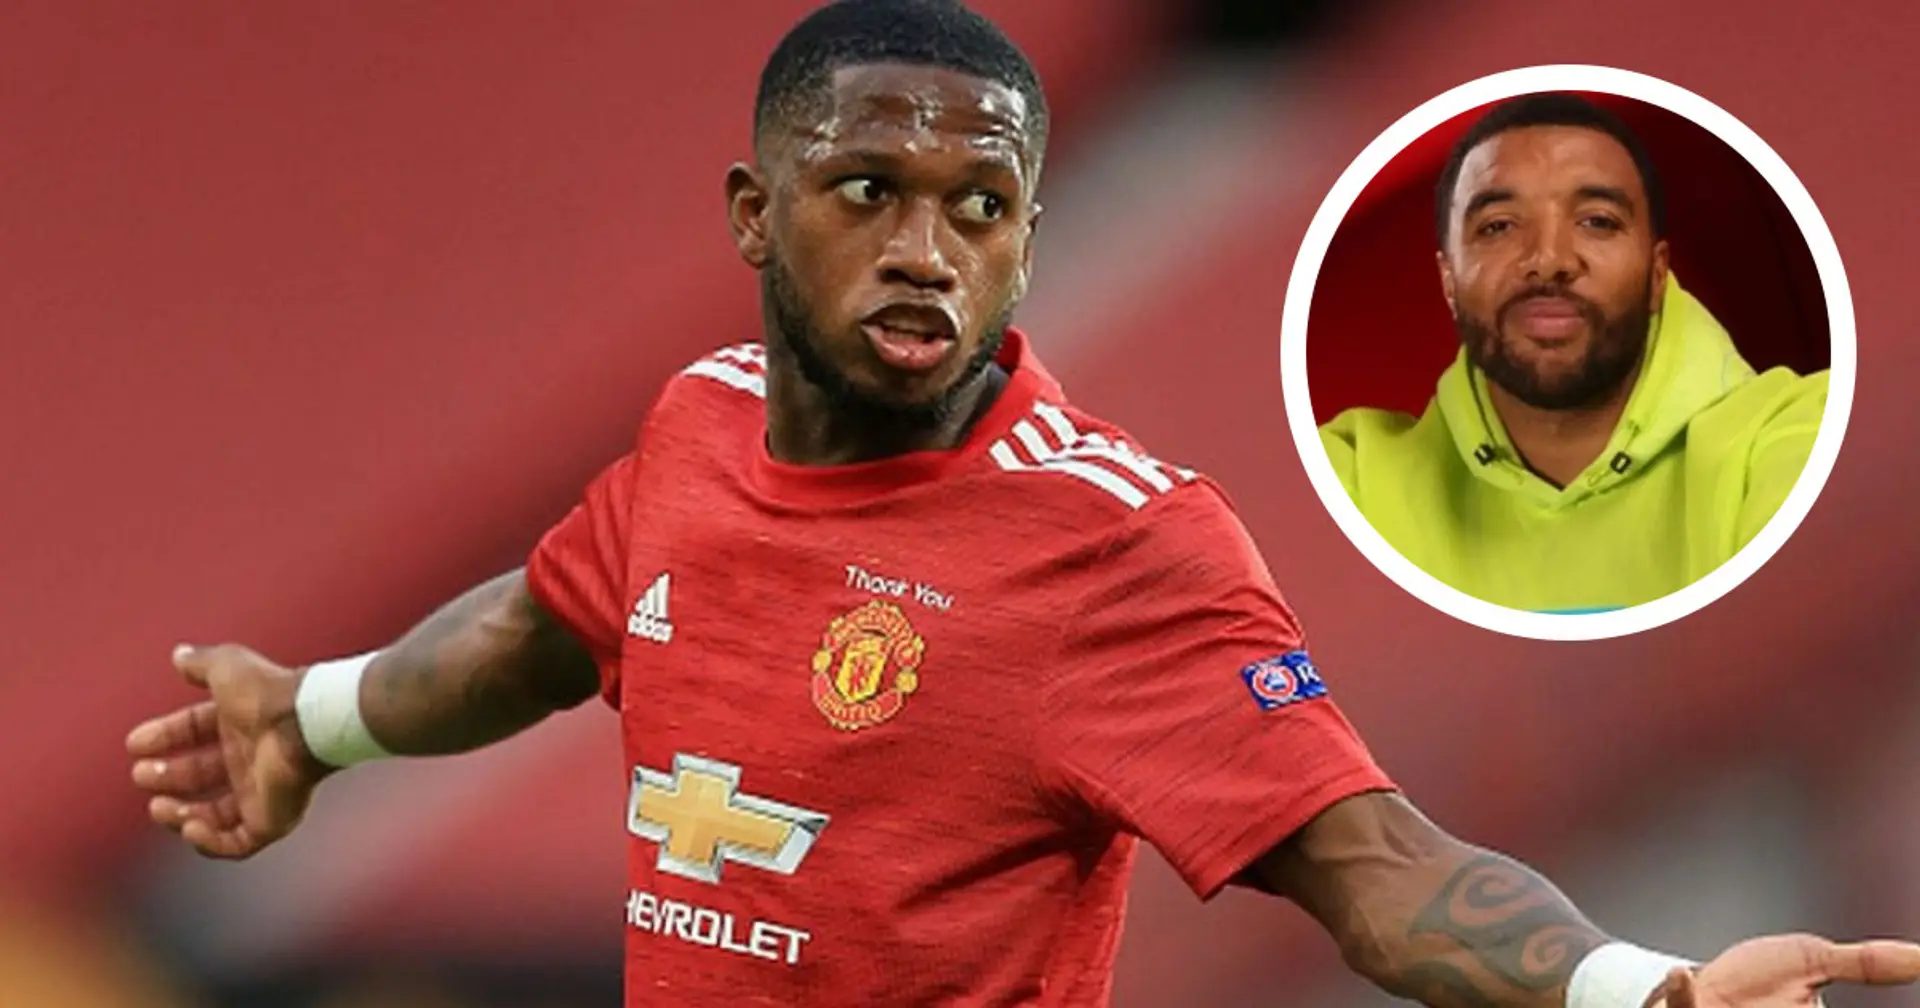 ‘He doesn’t know how to do one or two touches’: Troy Deeney hints at Fred’s weaknesses – but fans are unimpressed